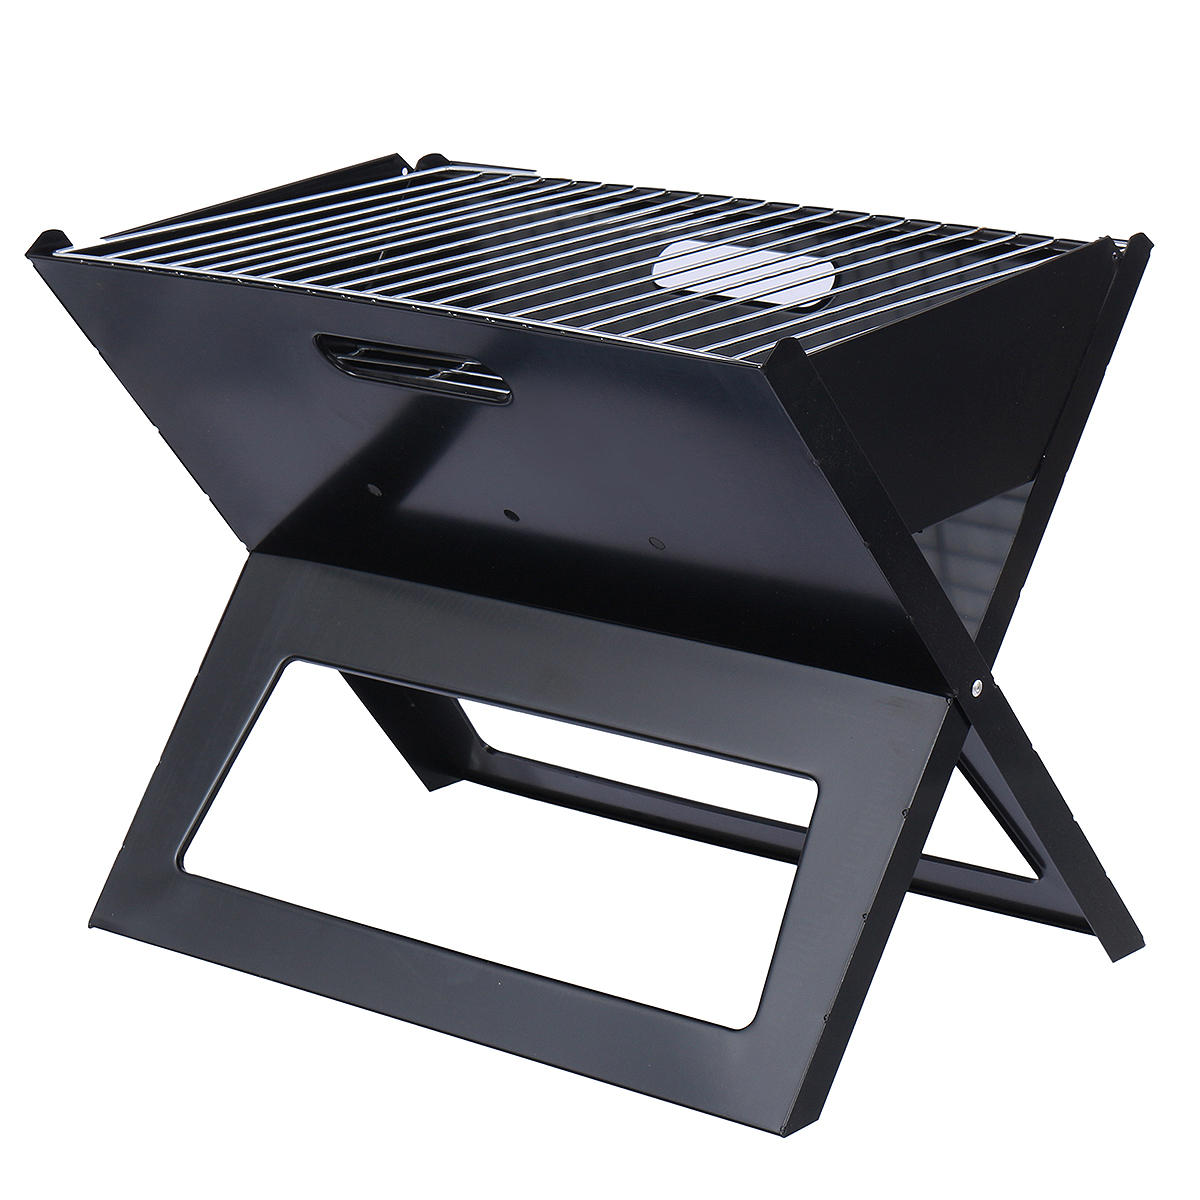 3-5 Mensen Outdoor Draagbare Vouwen Barbecue BBQ Grill Houtskool Fornuis Camping Picknick